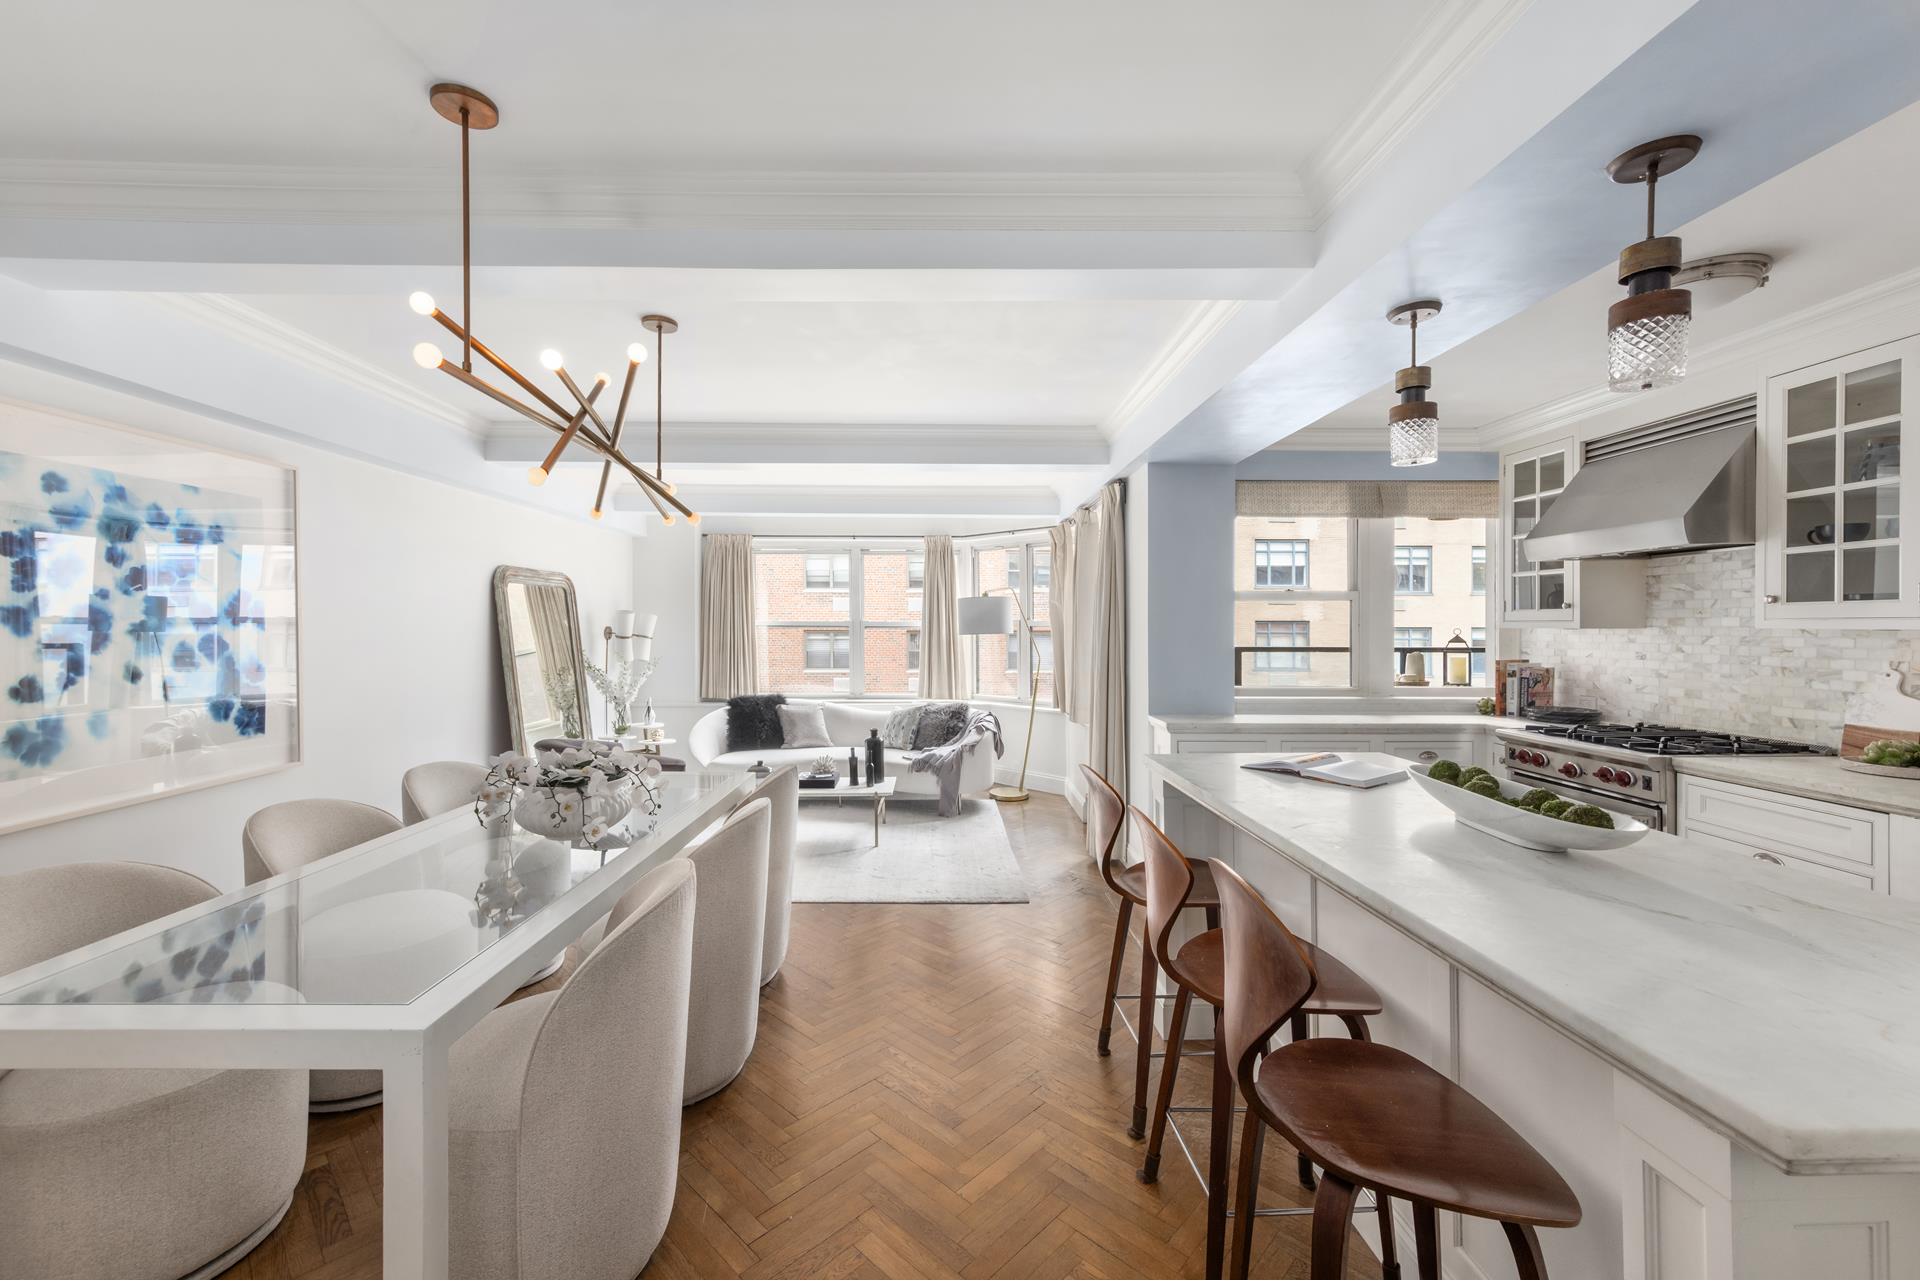 177 East 77th Street 7Bc, Lenox Hill, Upper East Side, NYC - 4 Bedrooms  
3 Bathrooms  
7 Rooms - 